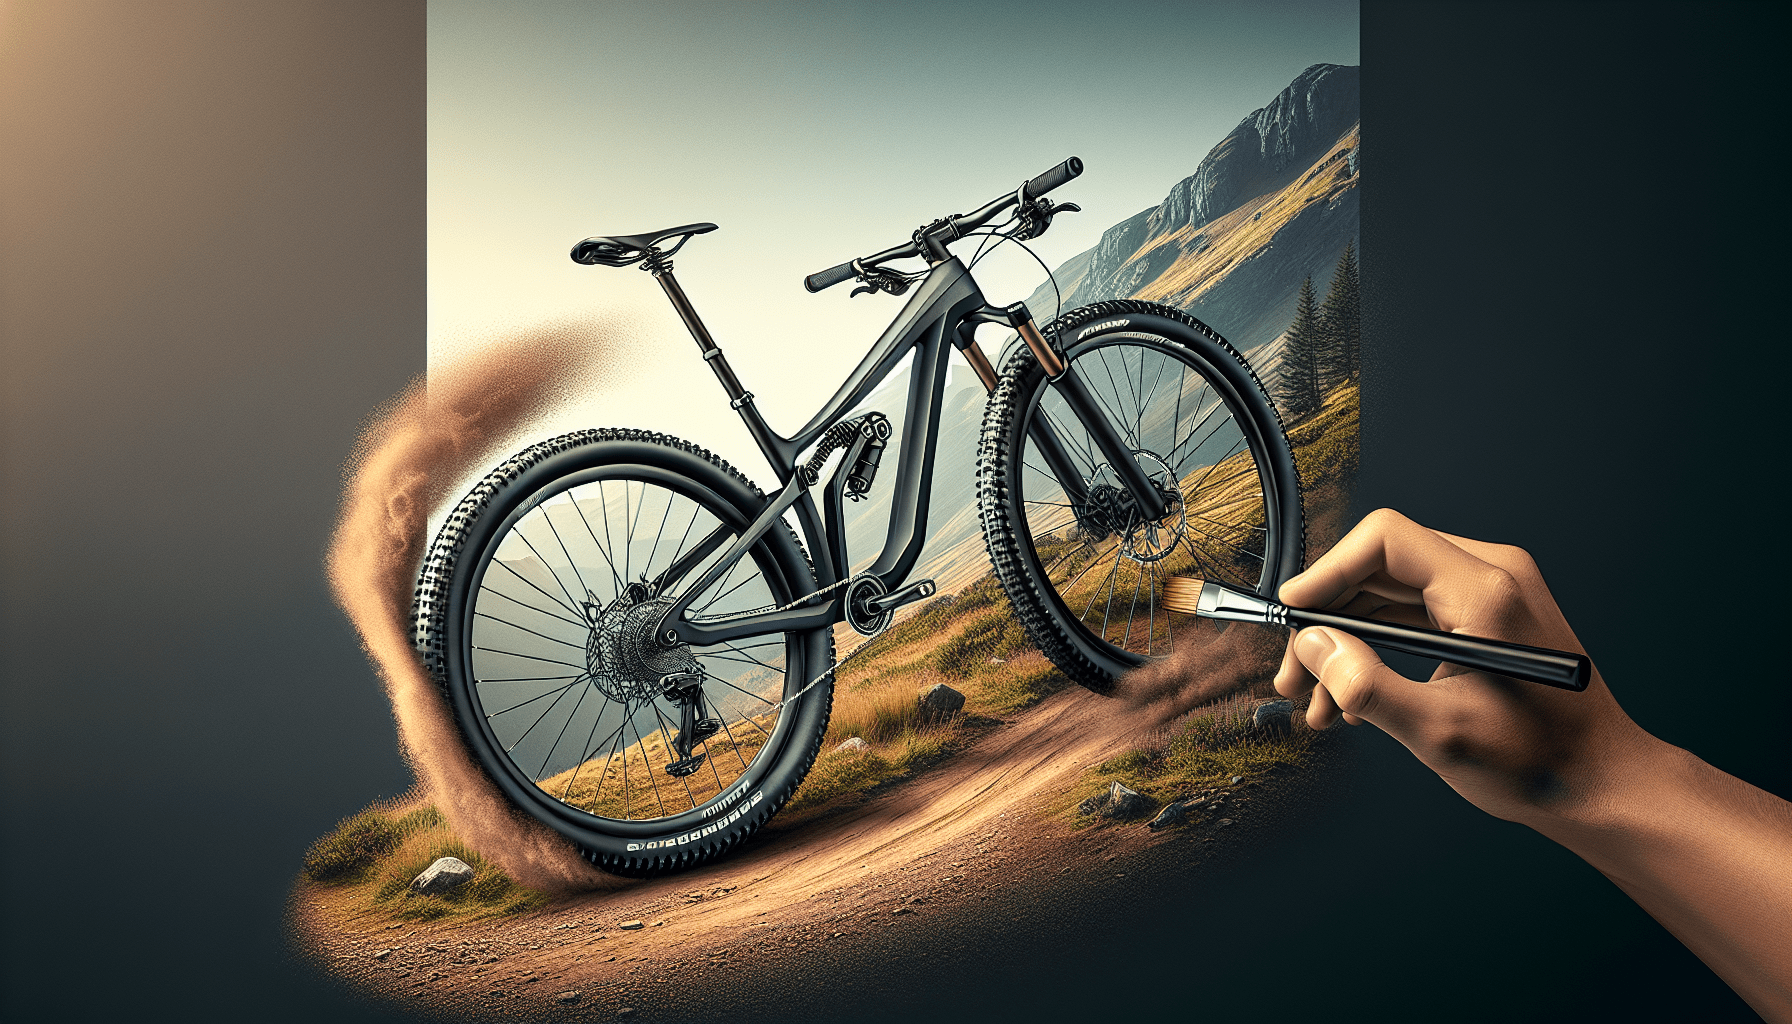 Embrace The Trail: Discover The Top 3 Reilly Spectre Bikes For Off-Roading!